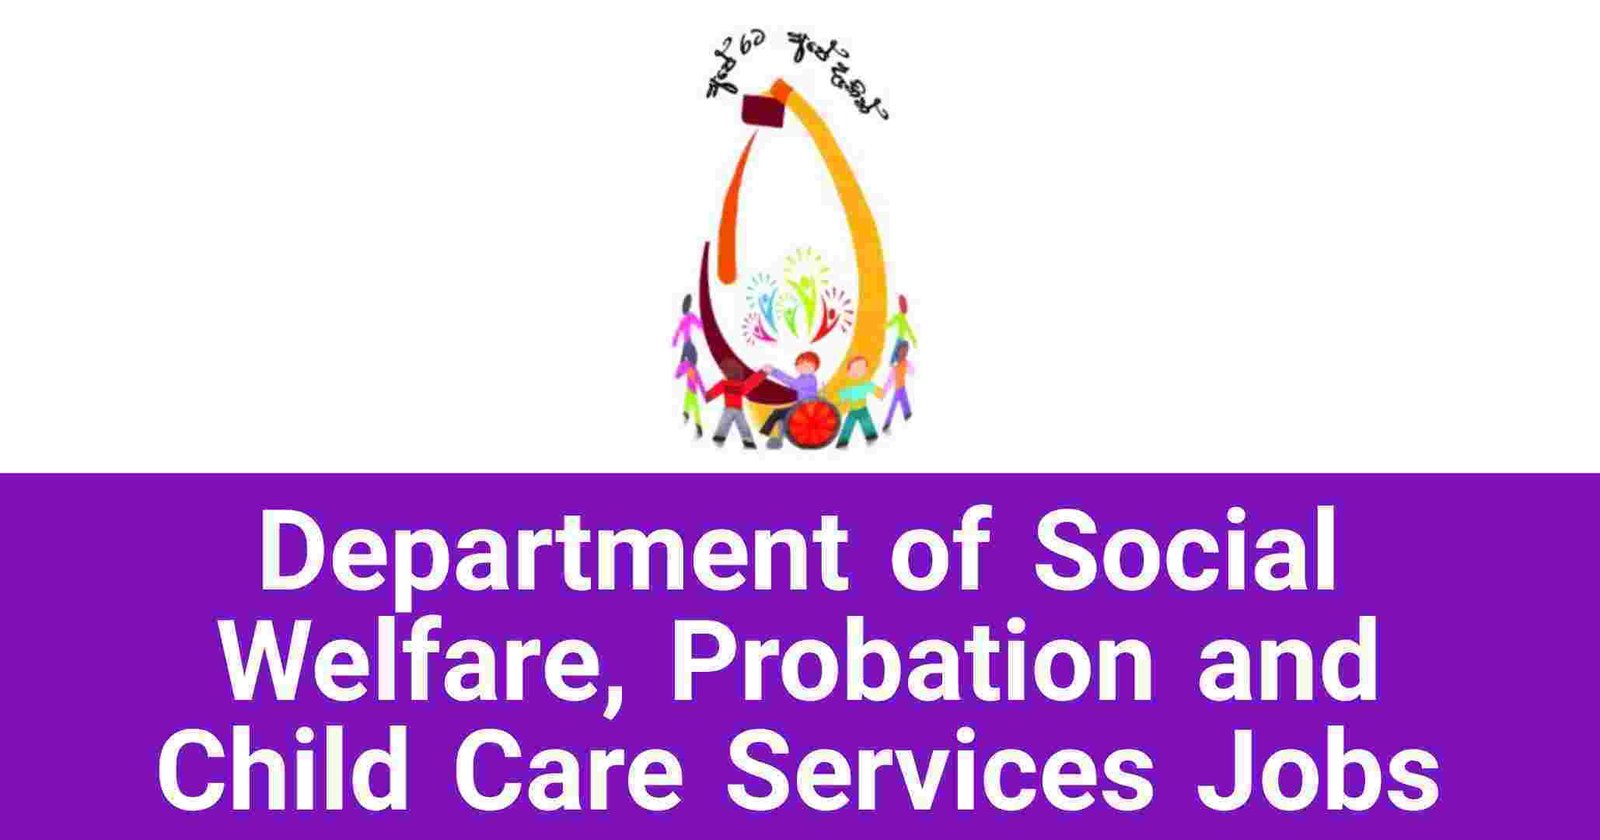 Department of Social Welfare Probation and Child Care Services Jobs Vacancies